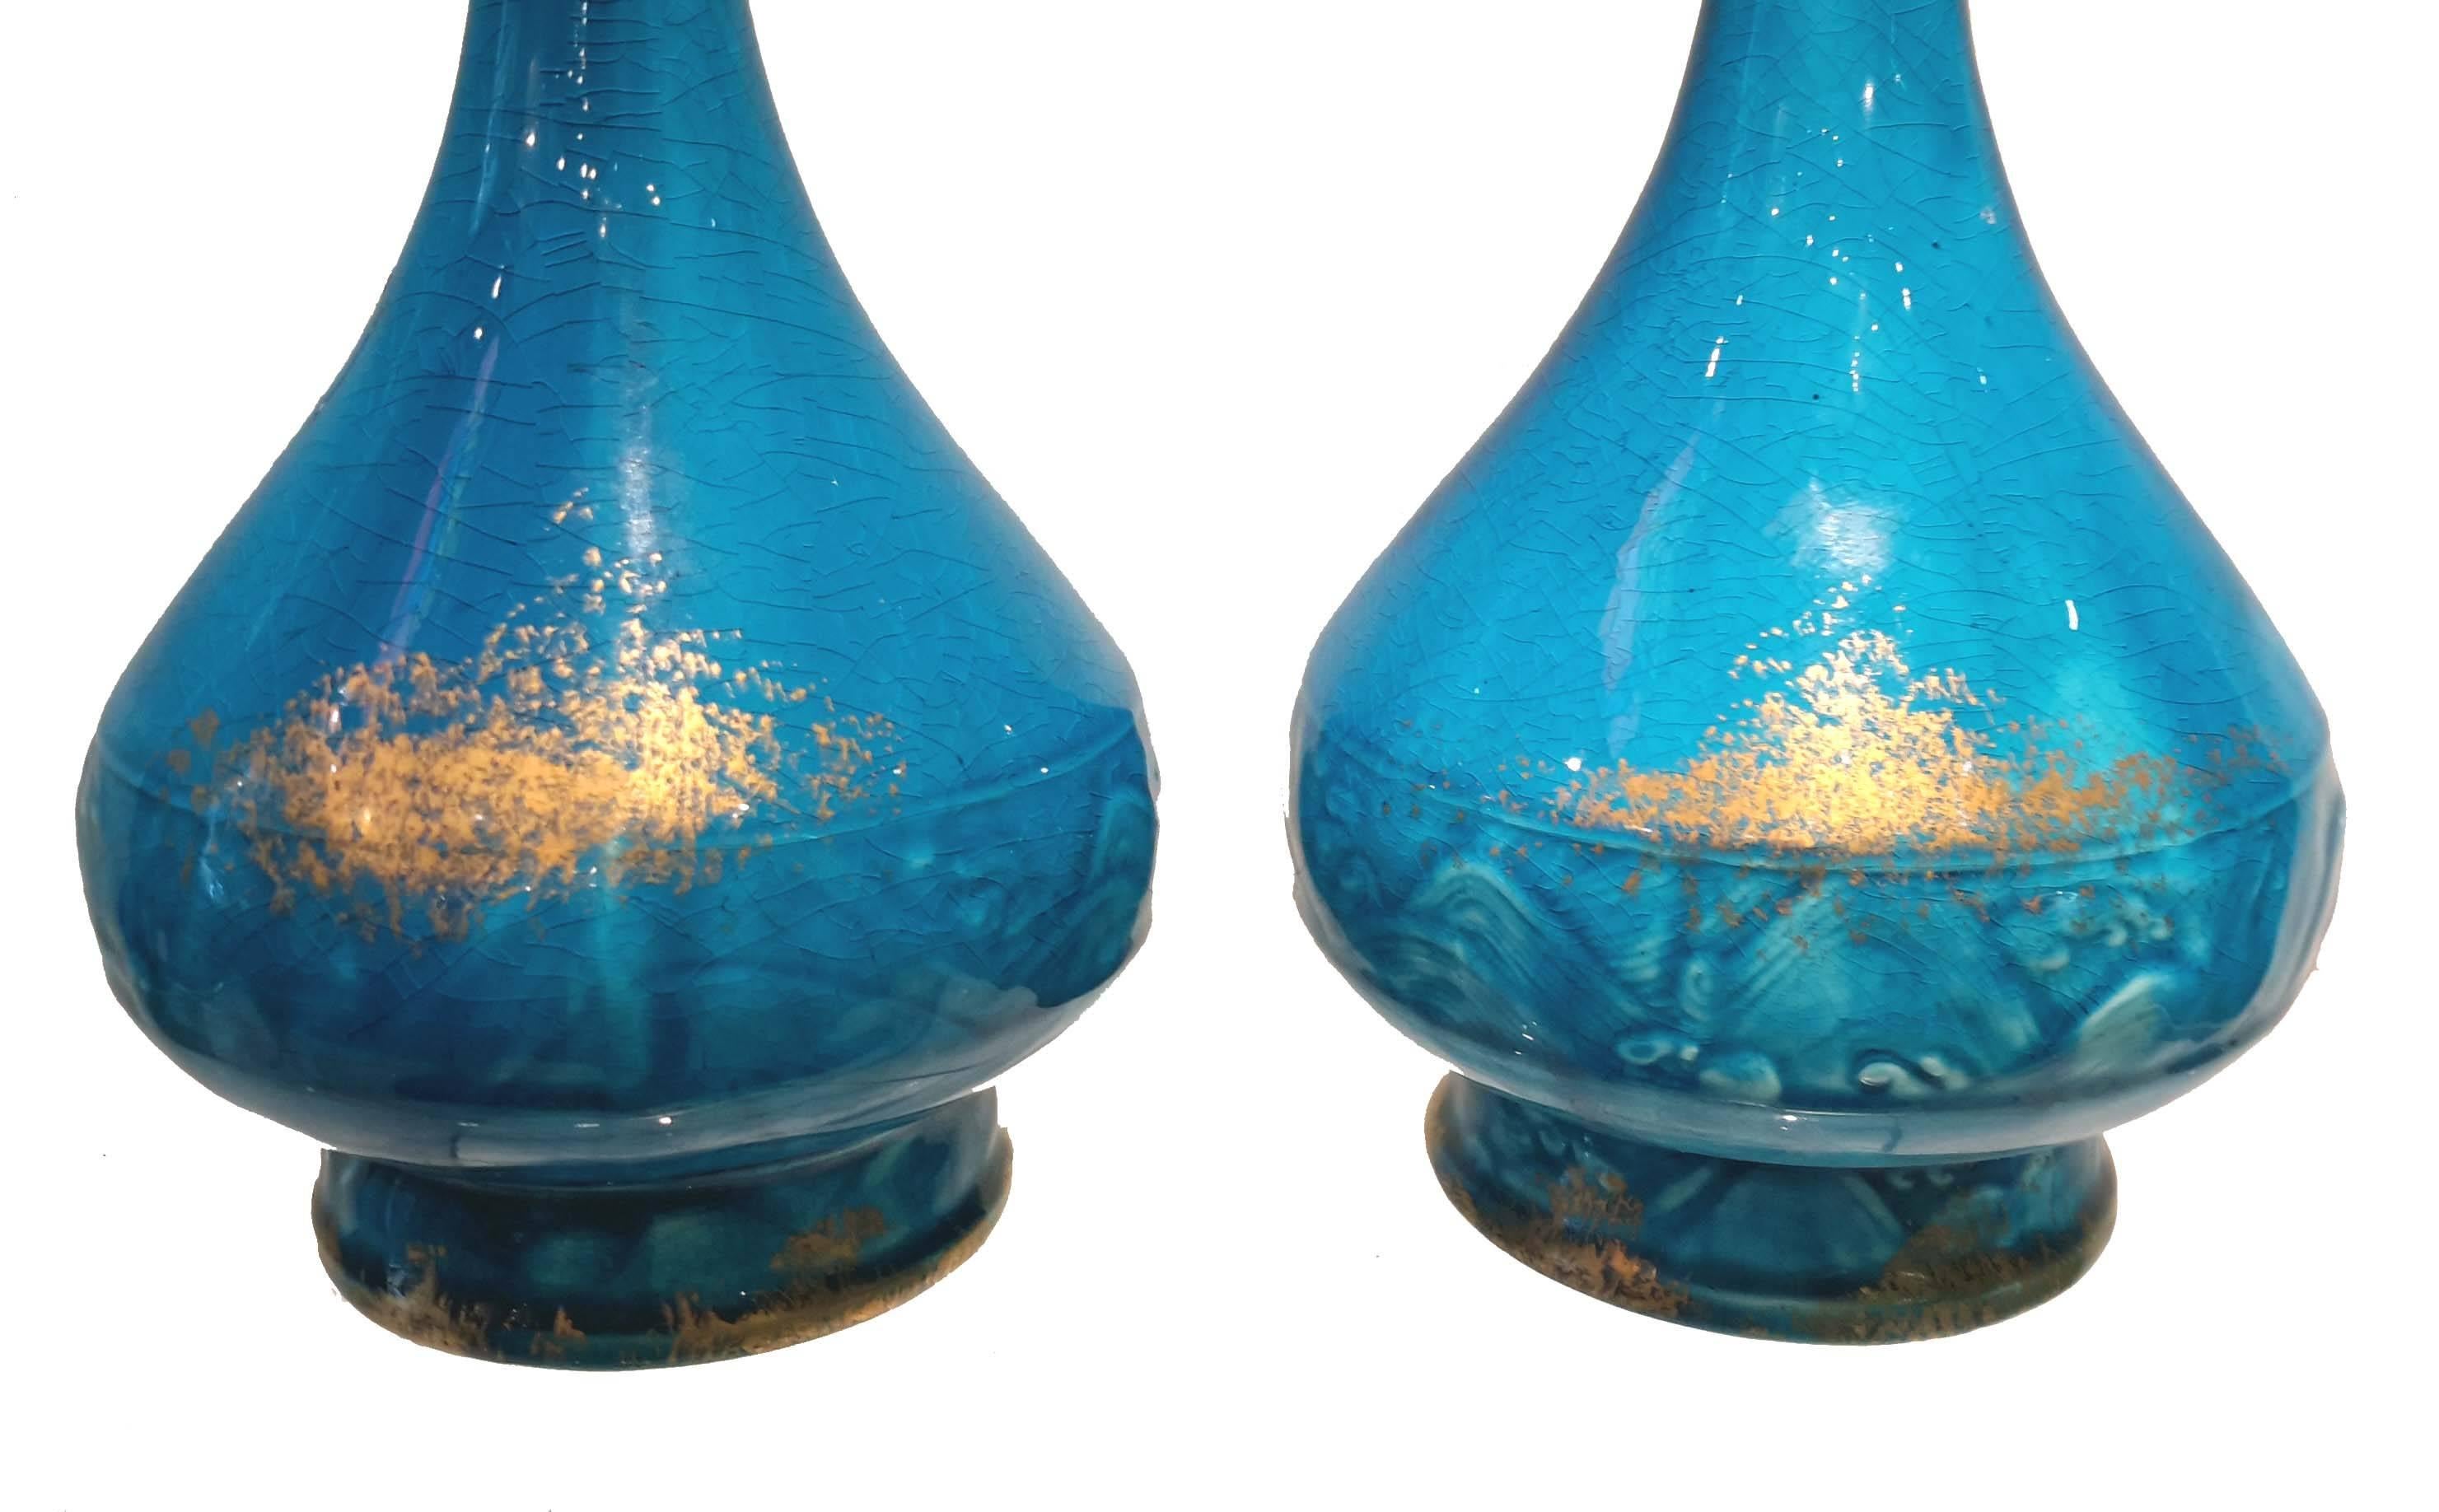 Glazed Theodore Deck Attributed Pair of 19th Century Turquoise Chinoiserie Arrow Vases